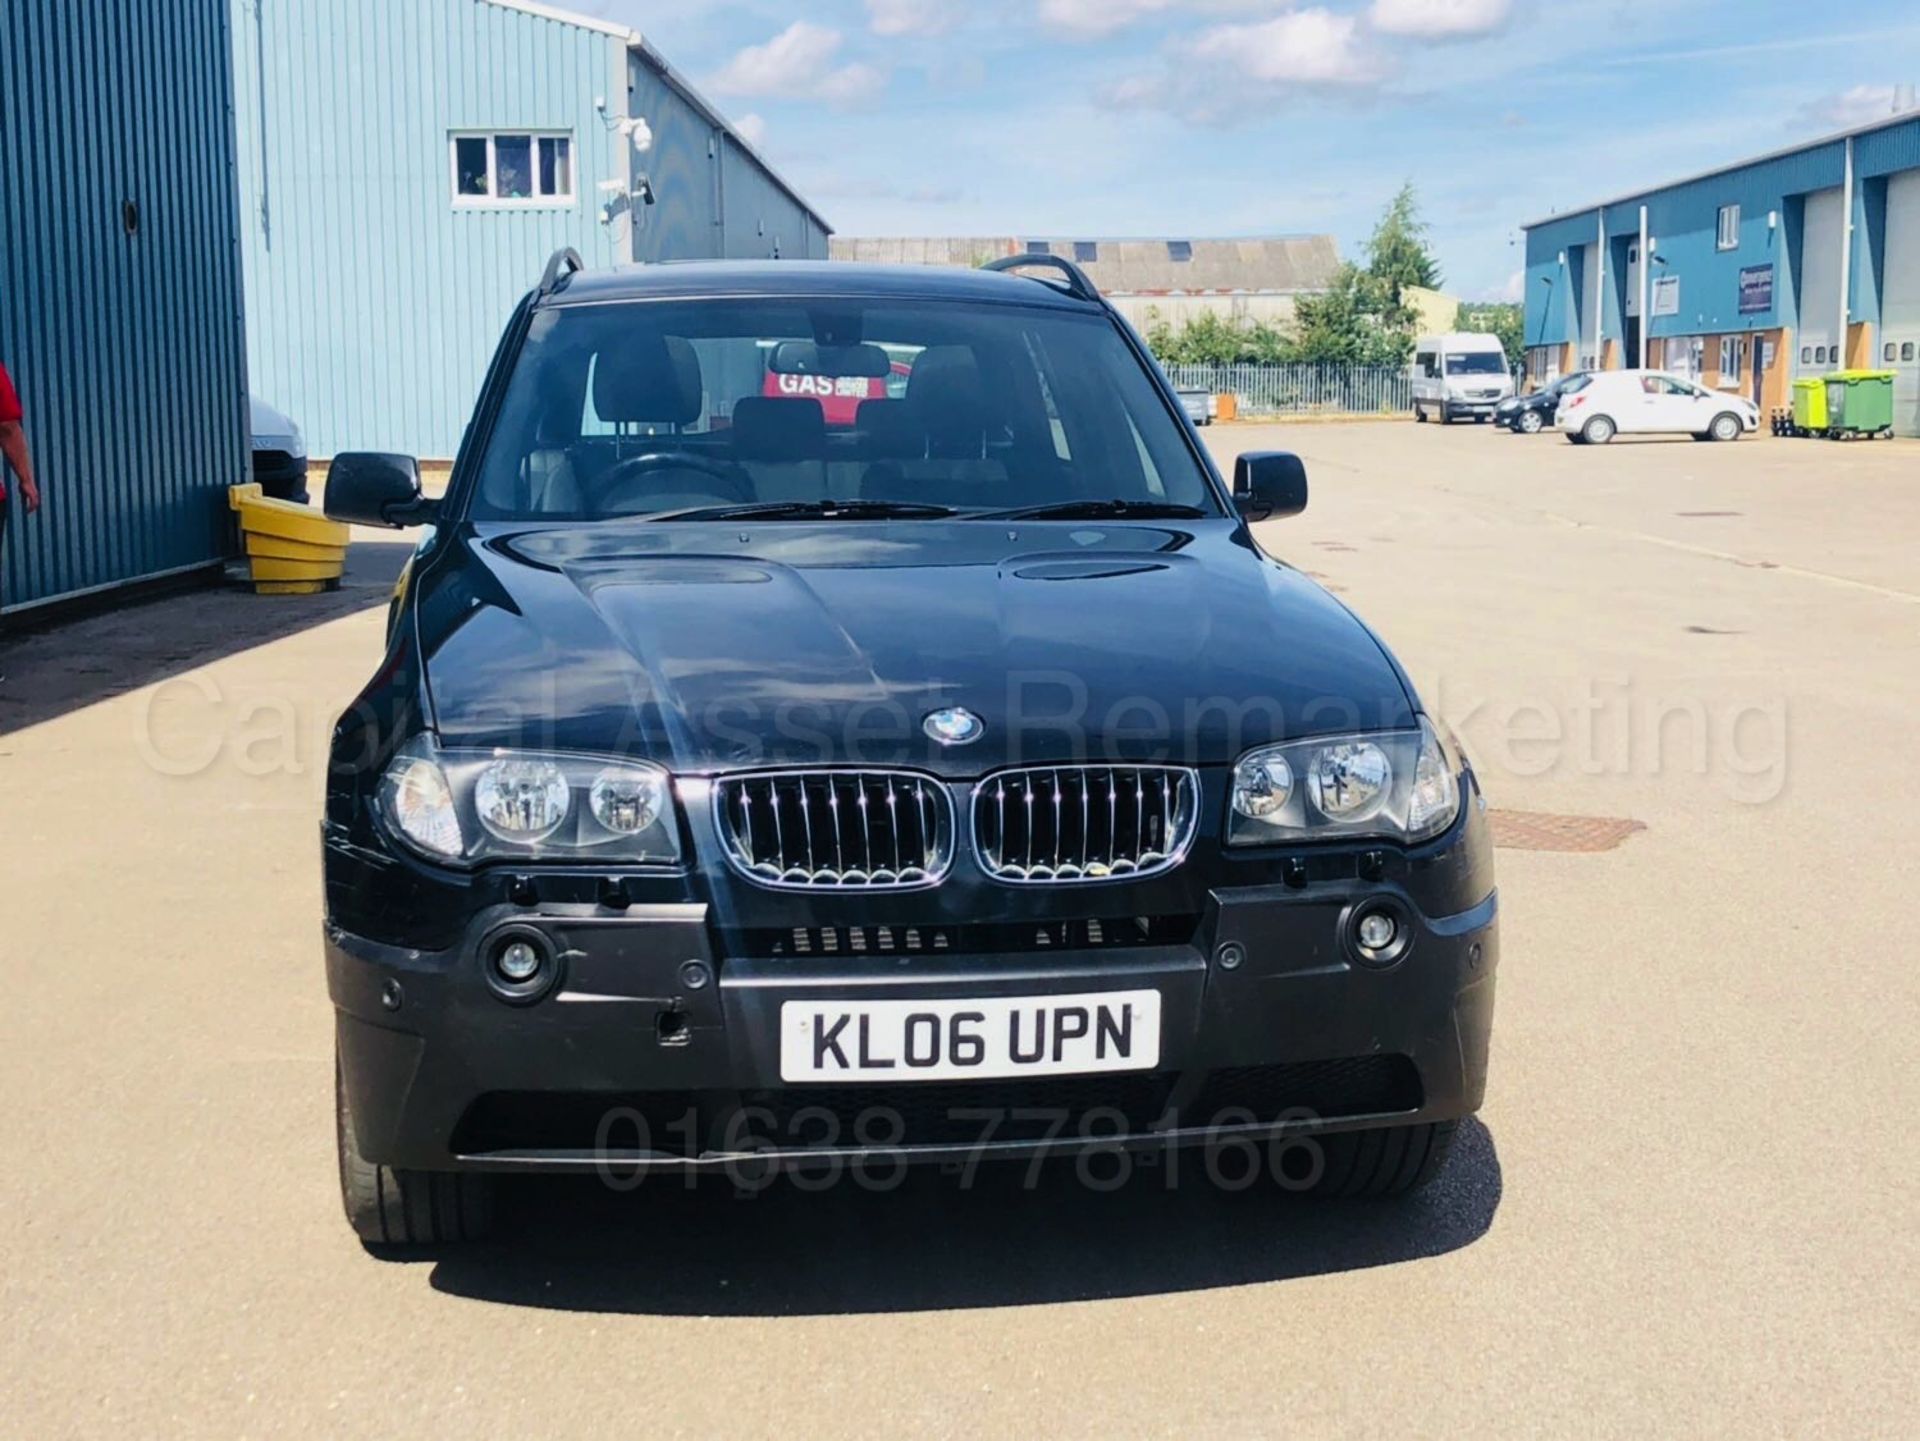 BMW X3 *SPORT EDITION* (2006) '3.0 DIESEL - 218 BHP - AUTOMATIC' *LEATHER / AIR CON* (NO VAT) - Image 22 of 29